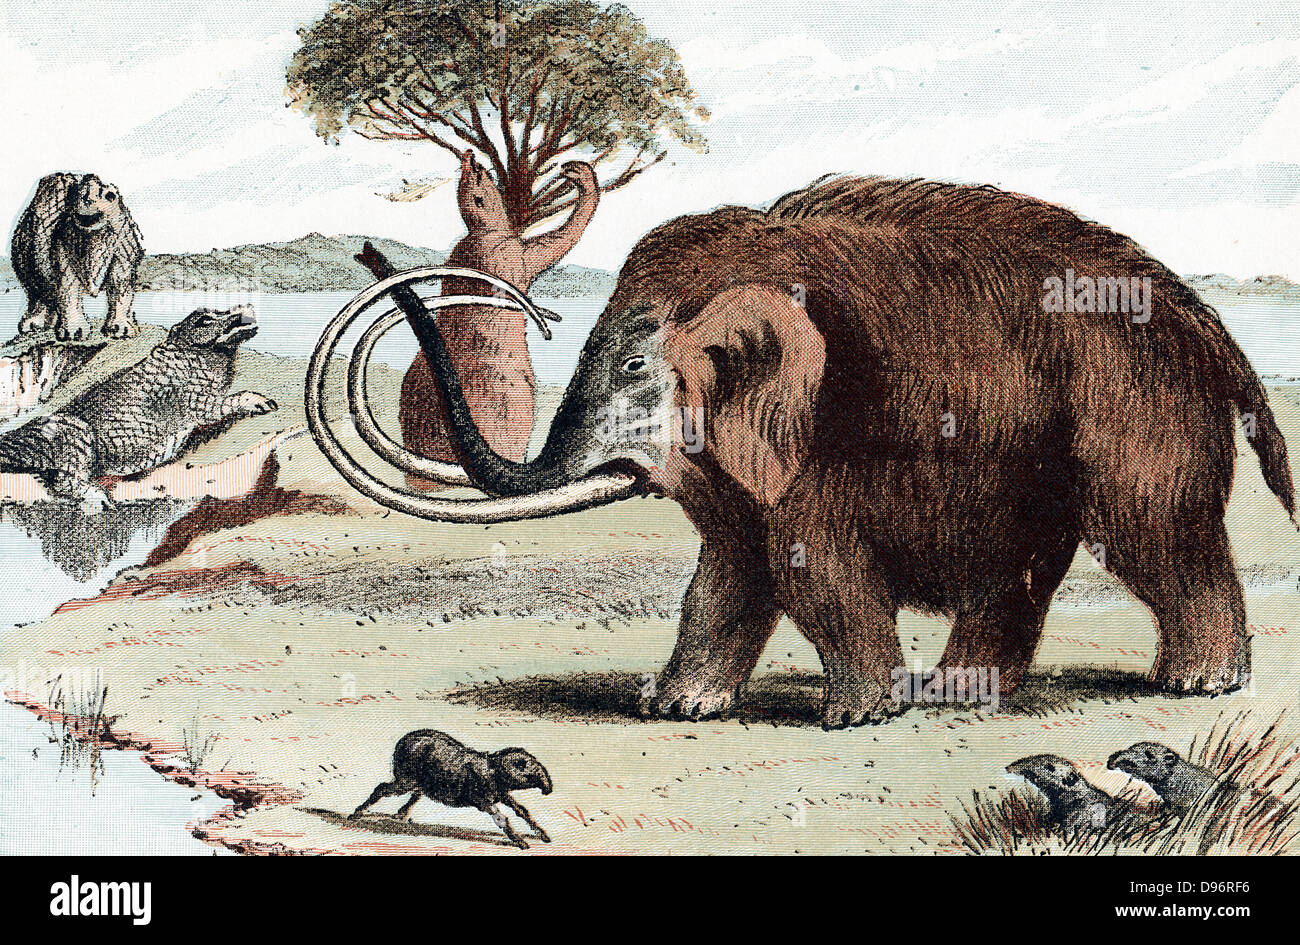 Woolly Mammoth (Mammuthus) extinct genus of elephant from Pleistocene Epoch (2,500,000 to 10,000 years ago) found in fossil deposits and in northern Europe as 30,000 year-old frozen carcasses in melting glaciers. From popular geology book published London 1892. Chromolithograph. Stock Photo